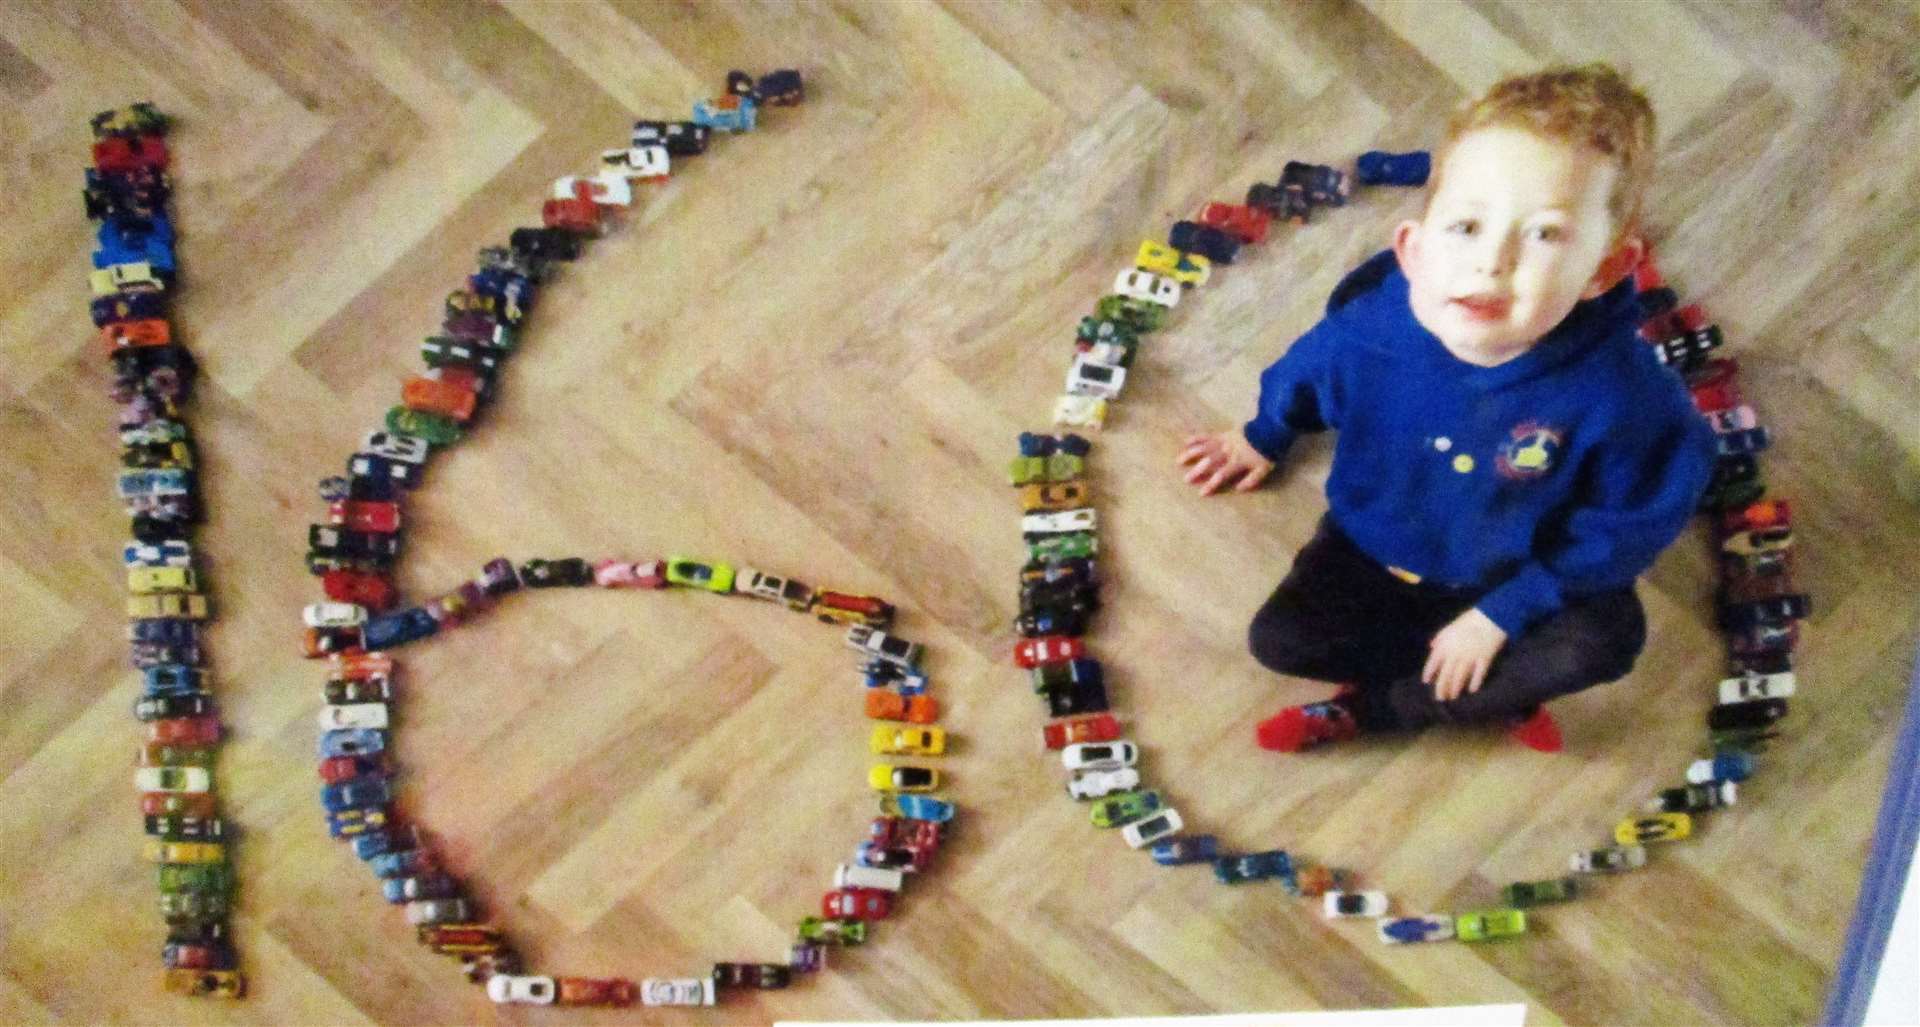 160 toy cars at the Early Learning Centre.